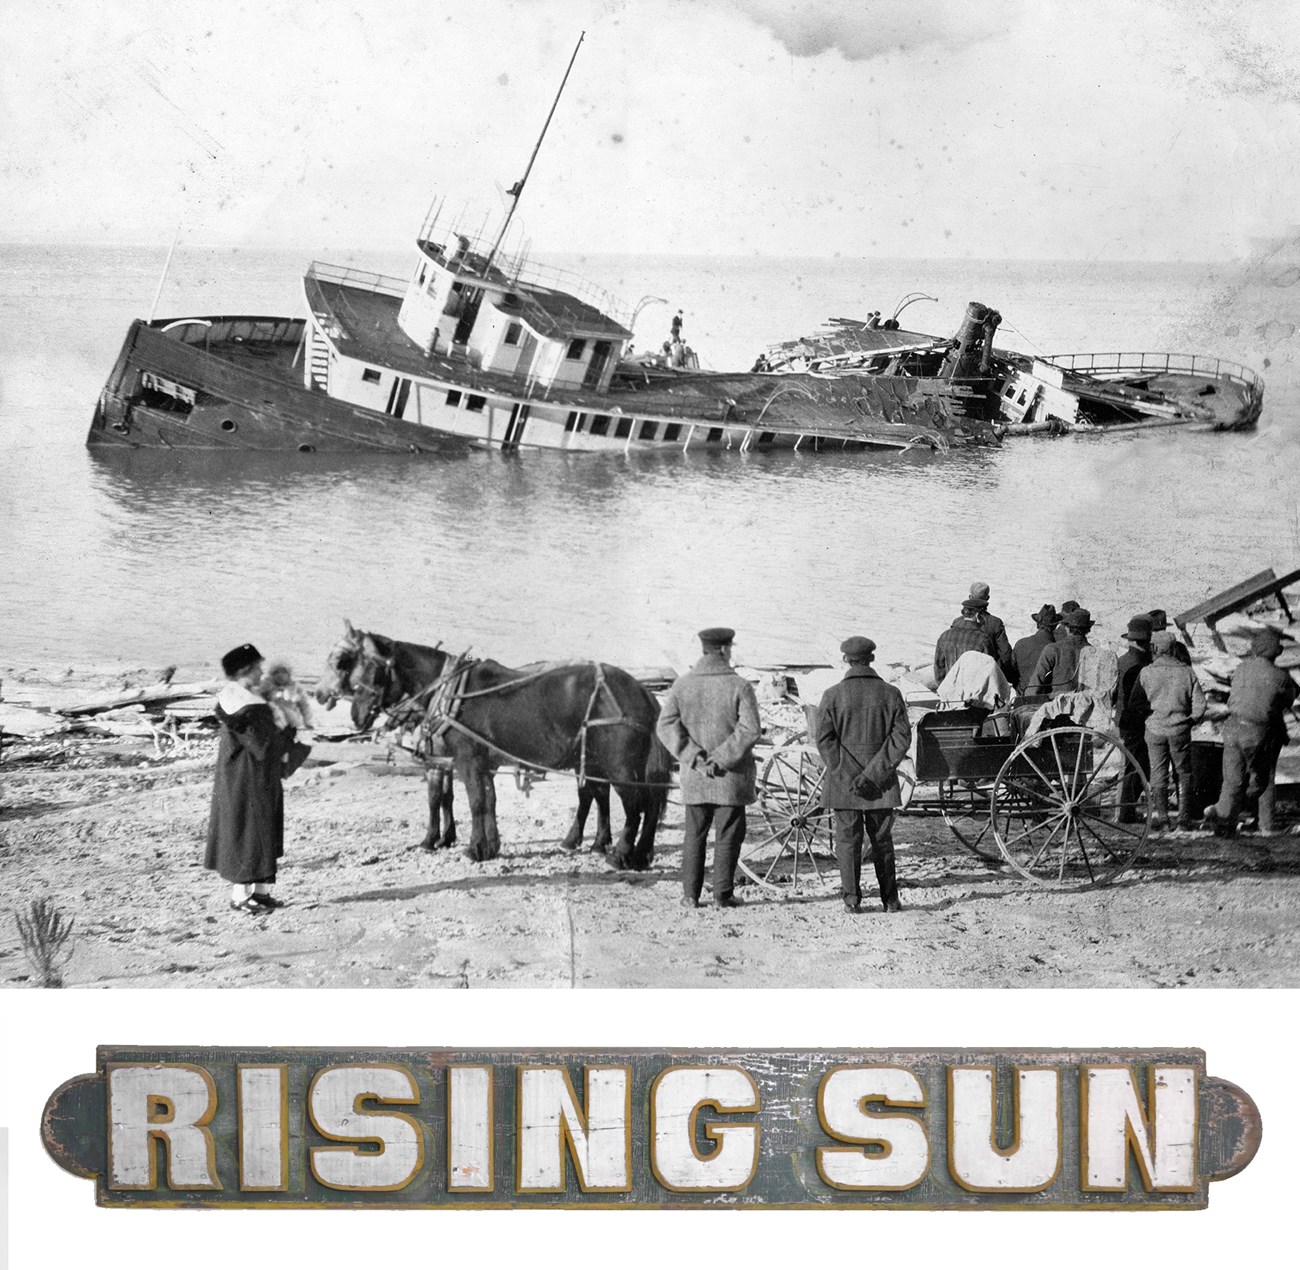 Shipwreck off shore with people on the beach, and a photo of the Rising Sun nameboard